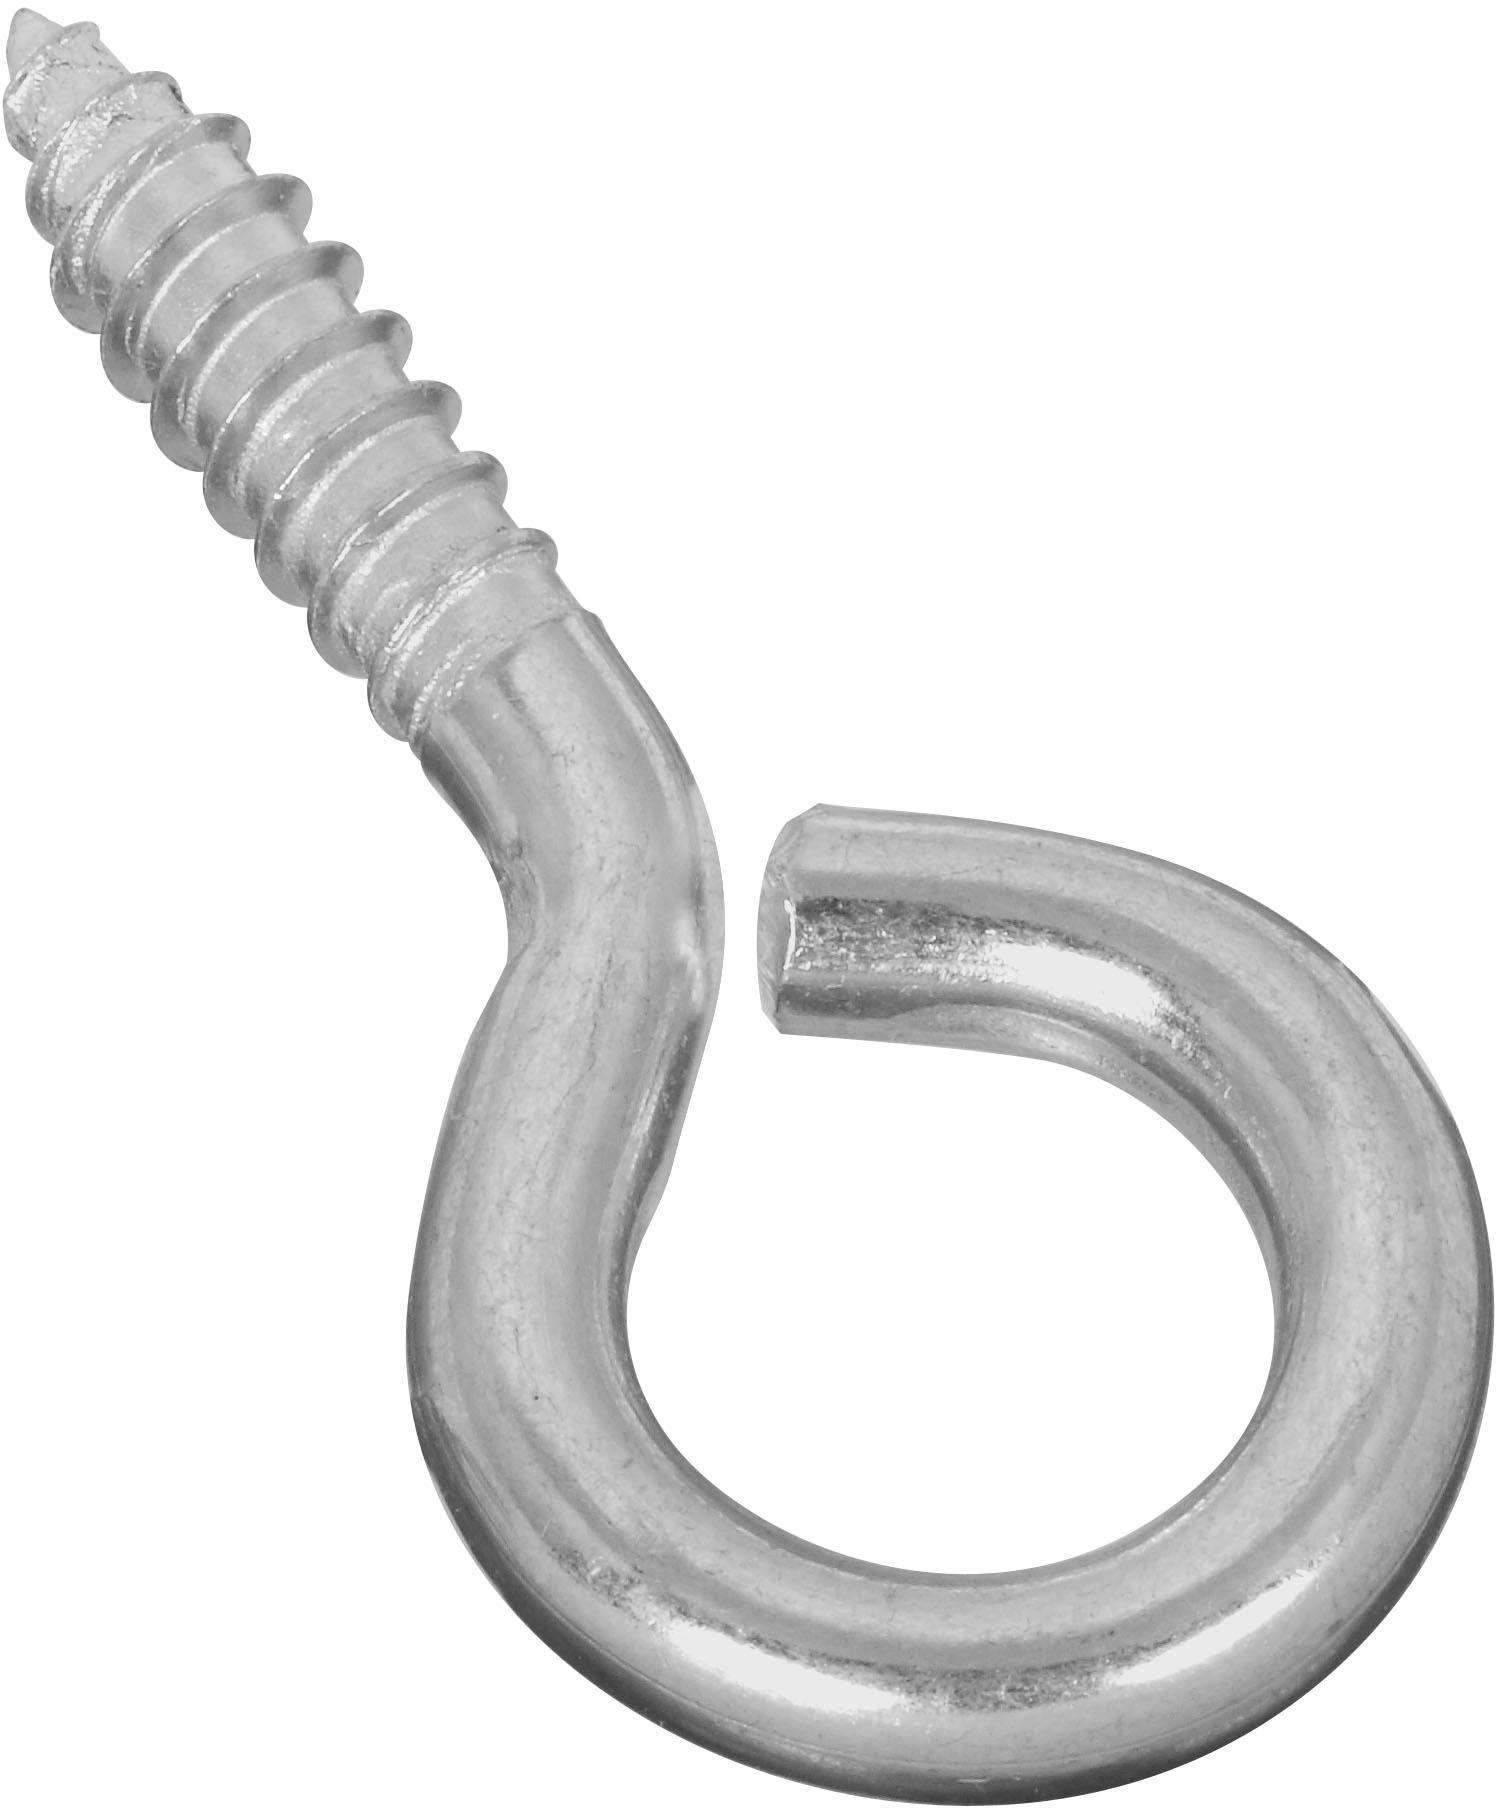 National Manufacturing Eye Screw - Zinc Plated, Large